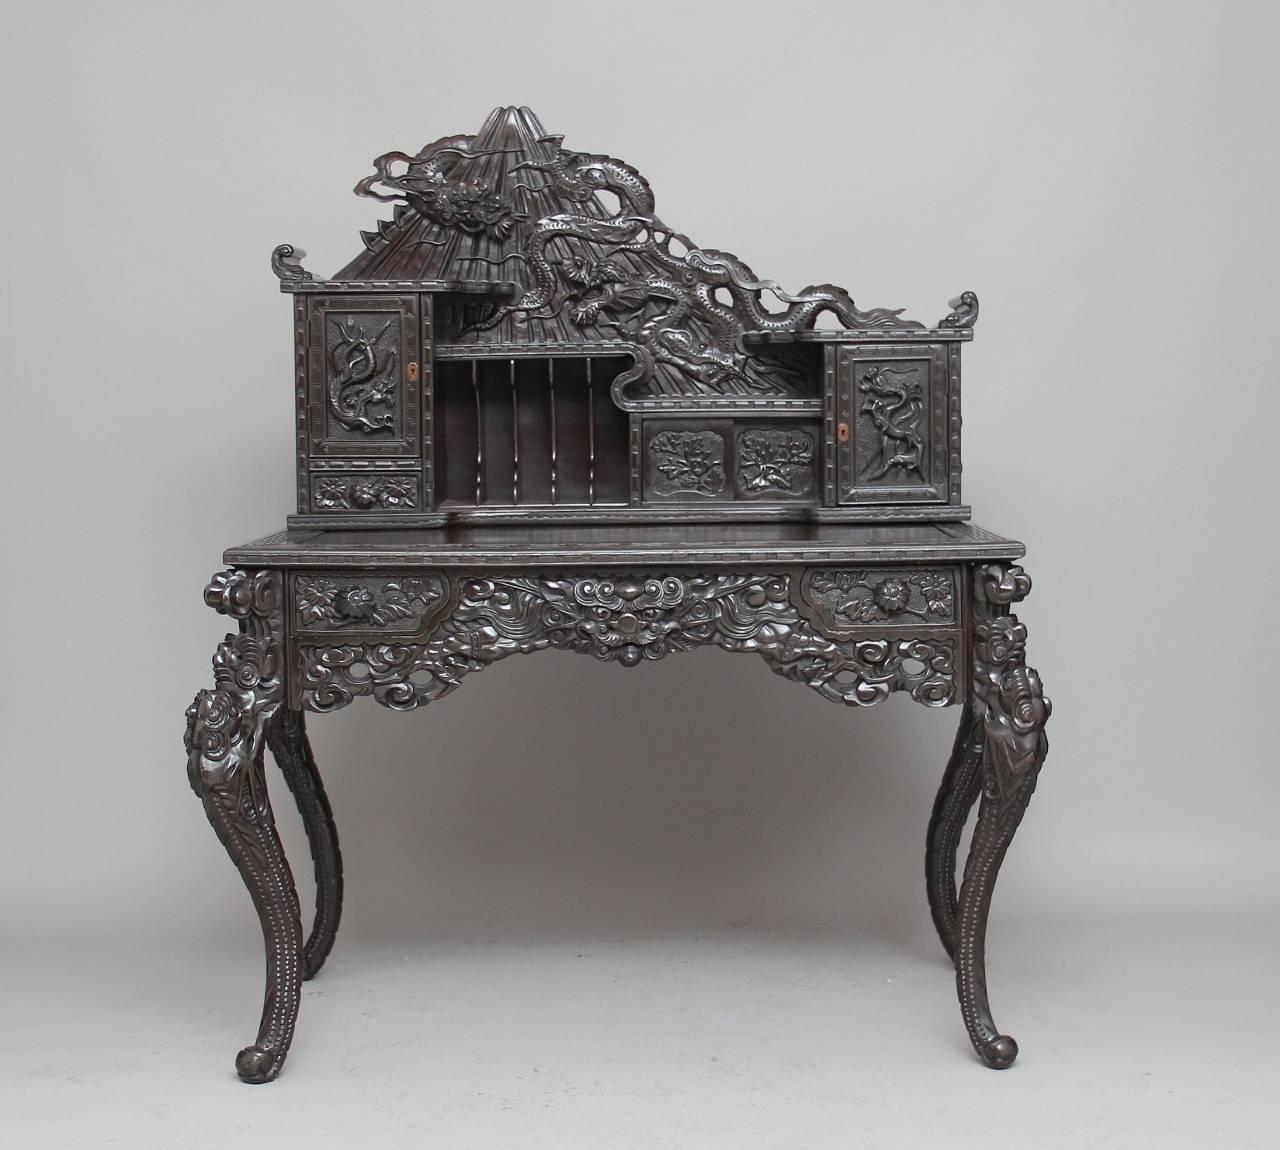 Early 20th century highly carved Chinese desk, the top section with a shaped back carved in relief with two dragons on a mountain, below with various compartments flanked either side with carved panelled doors and a small drawer on the left hand